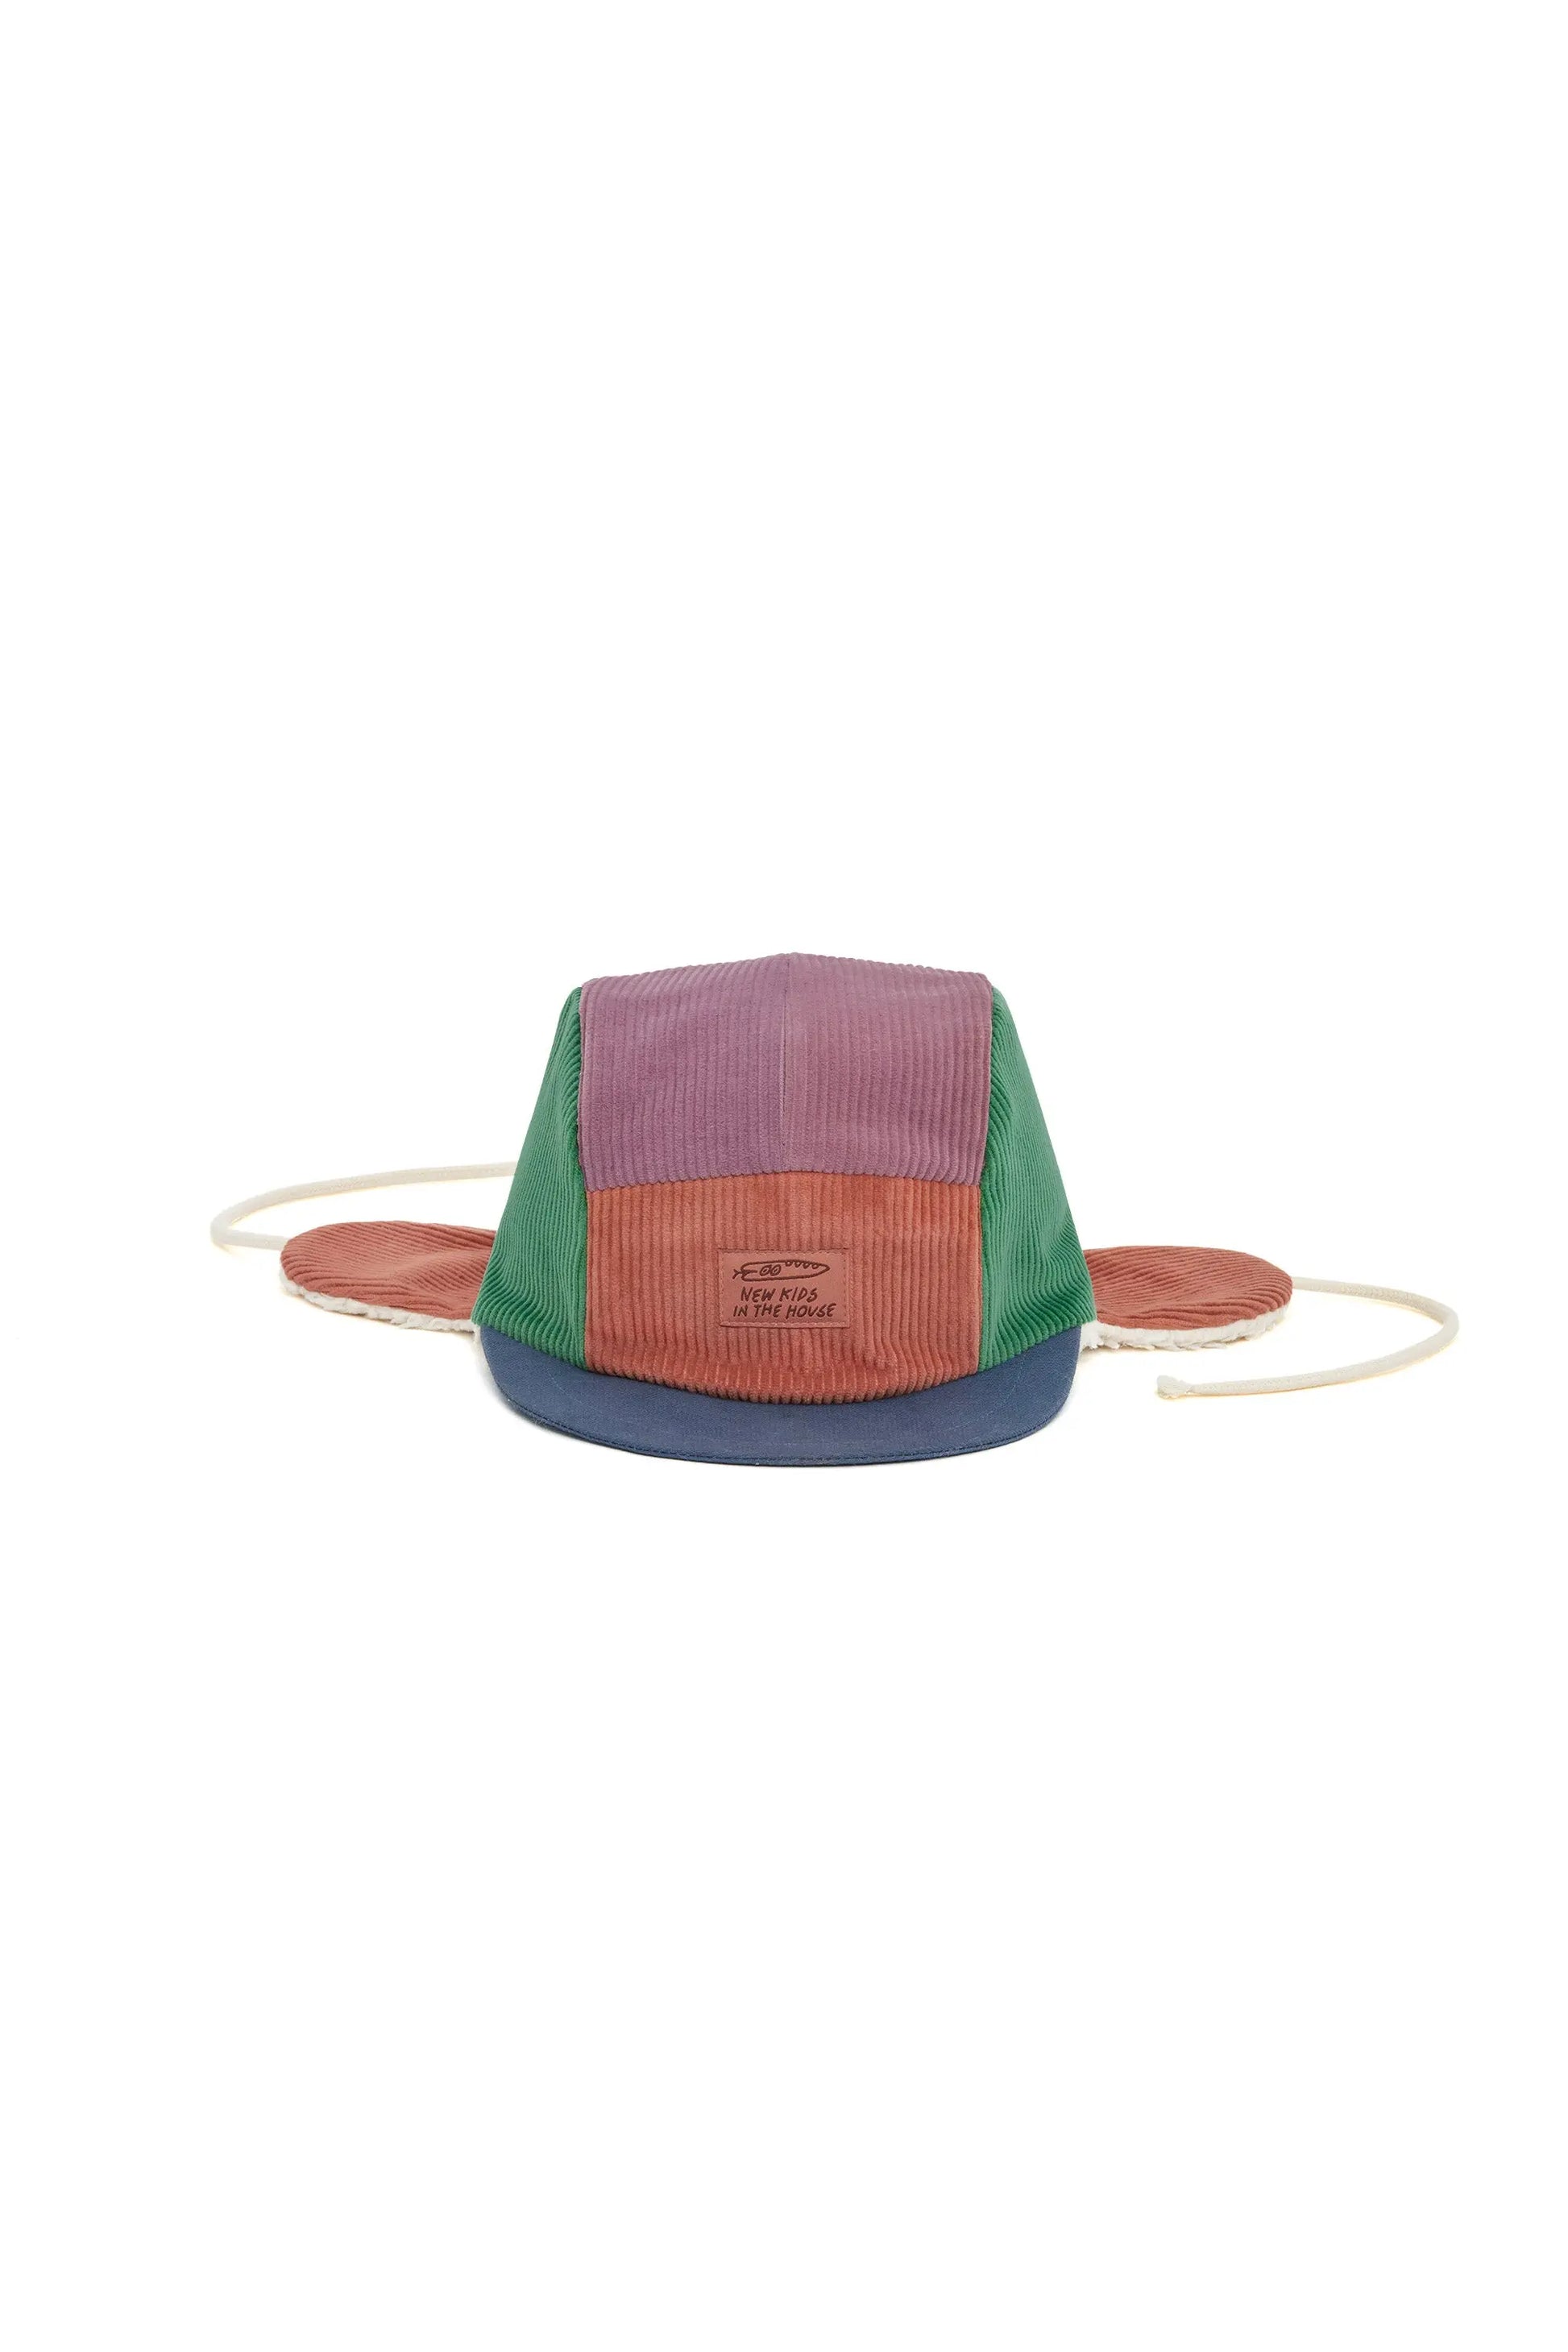 Corduroy 5-Panel Winter Cap with Ear Flaps New Kids In The House